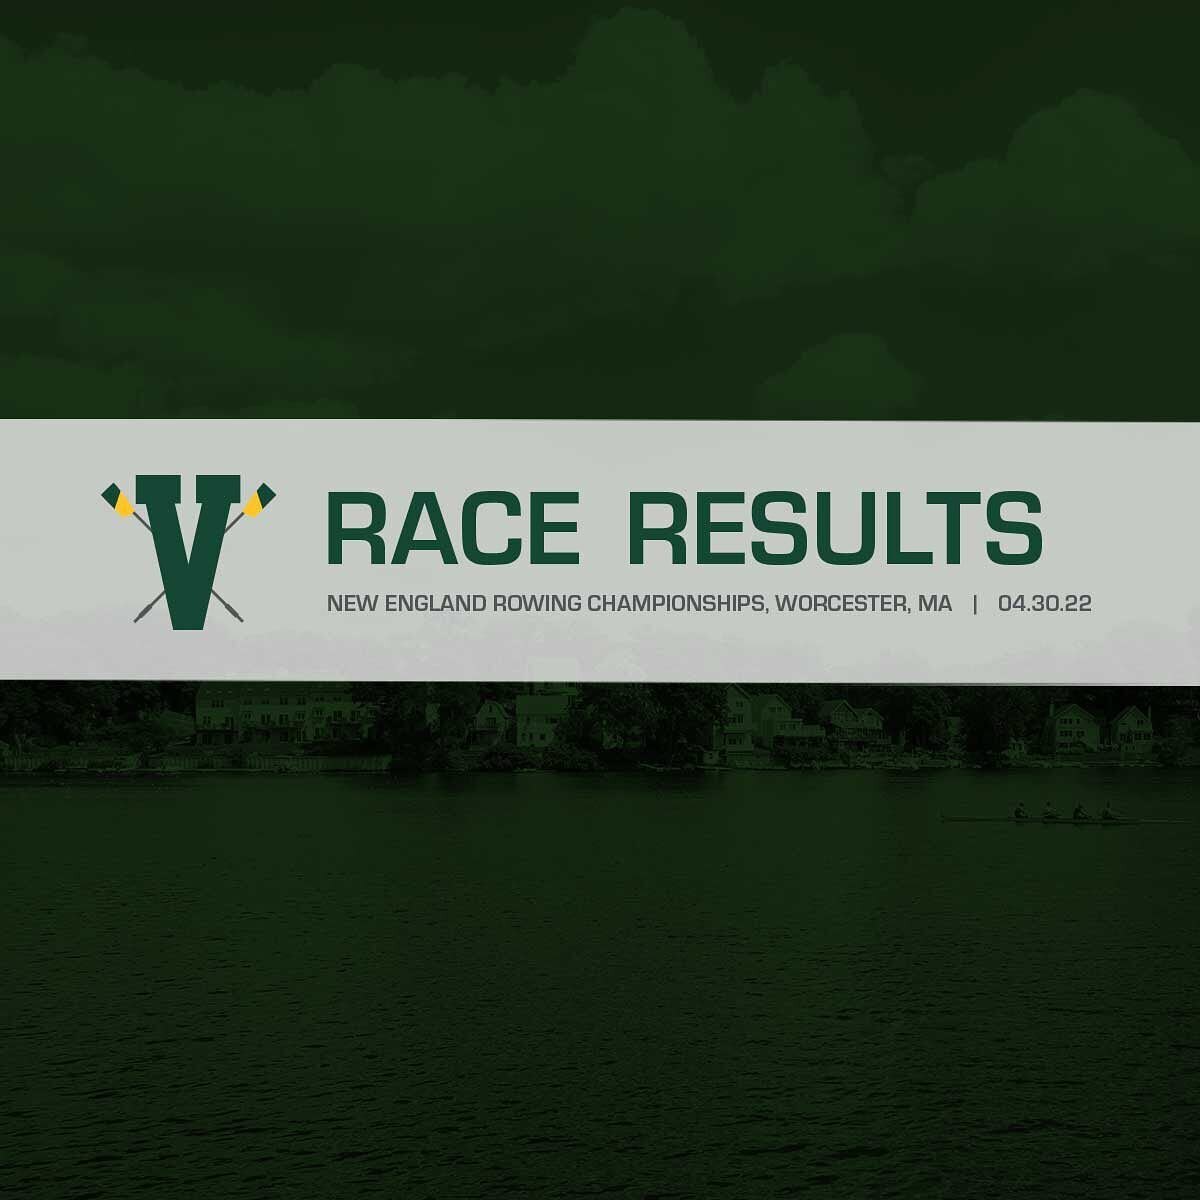 Despite the windy conditions, all boats had a full day of competition at NERCs in Worcester, MA. Lots of great rowing and even some hardware! Thanks to the @quinsigrowing for hosting and organizing. Looking forward to sending crews to Dad Vails next!